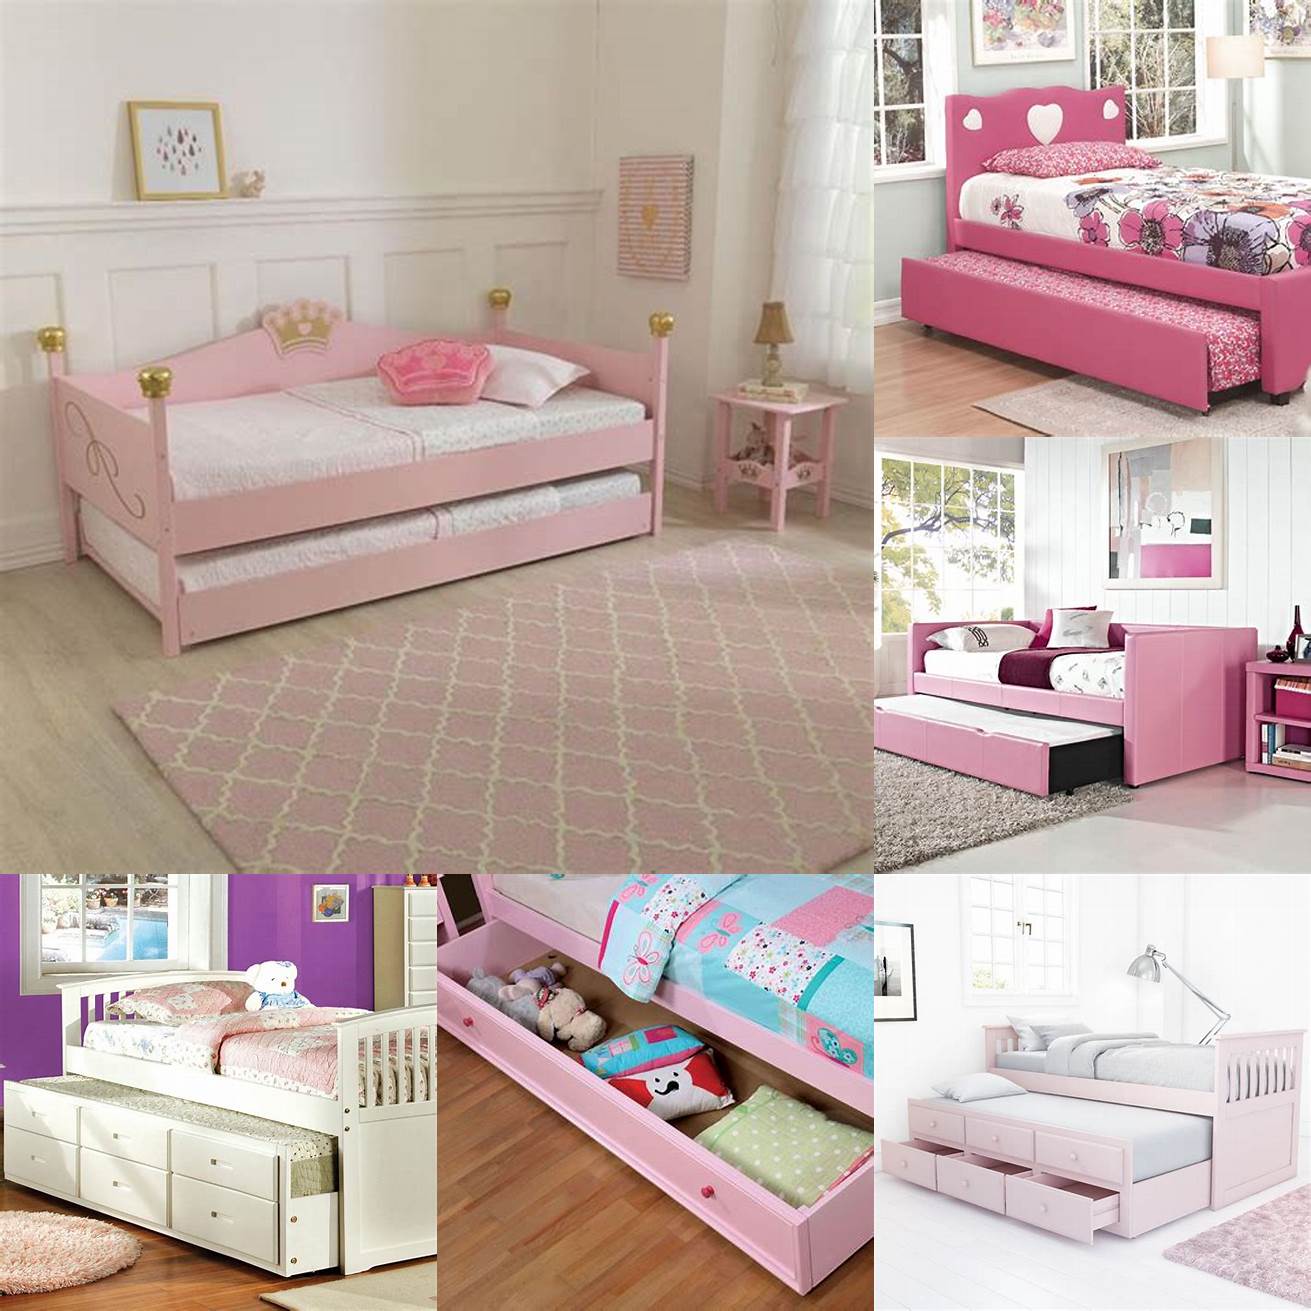 A charming white wooden trundle bed with pink bedding and floral accents is perfect for a little girls room